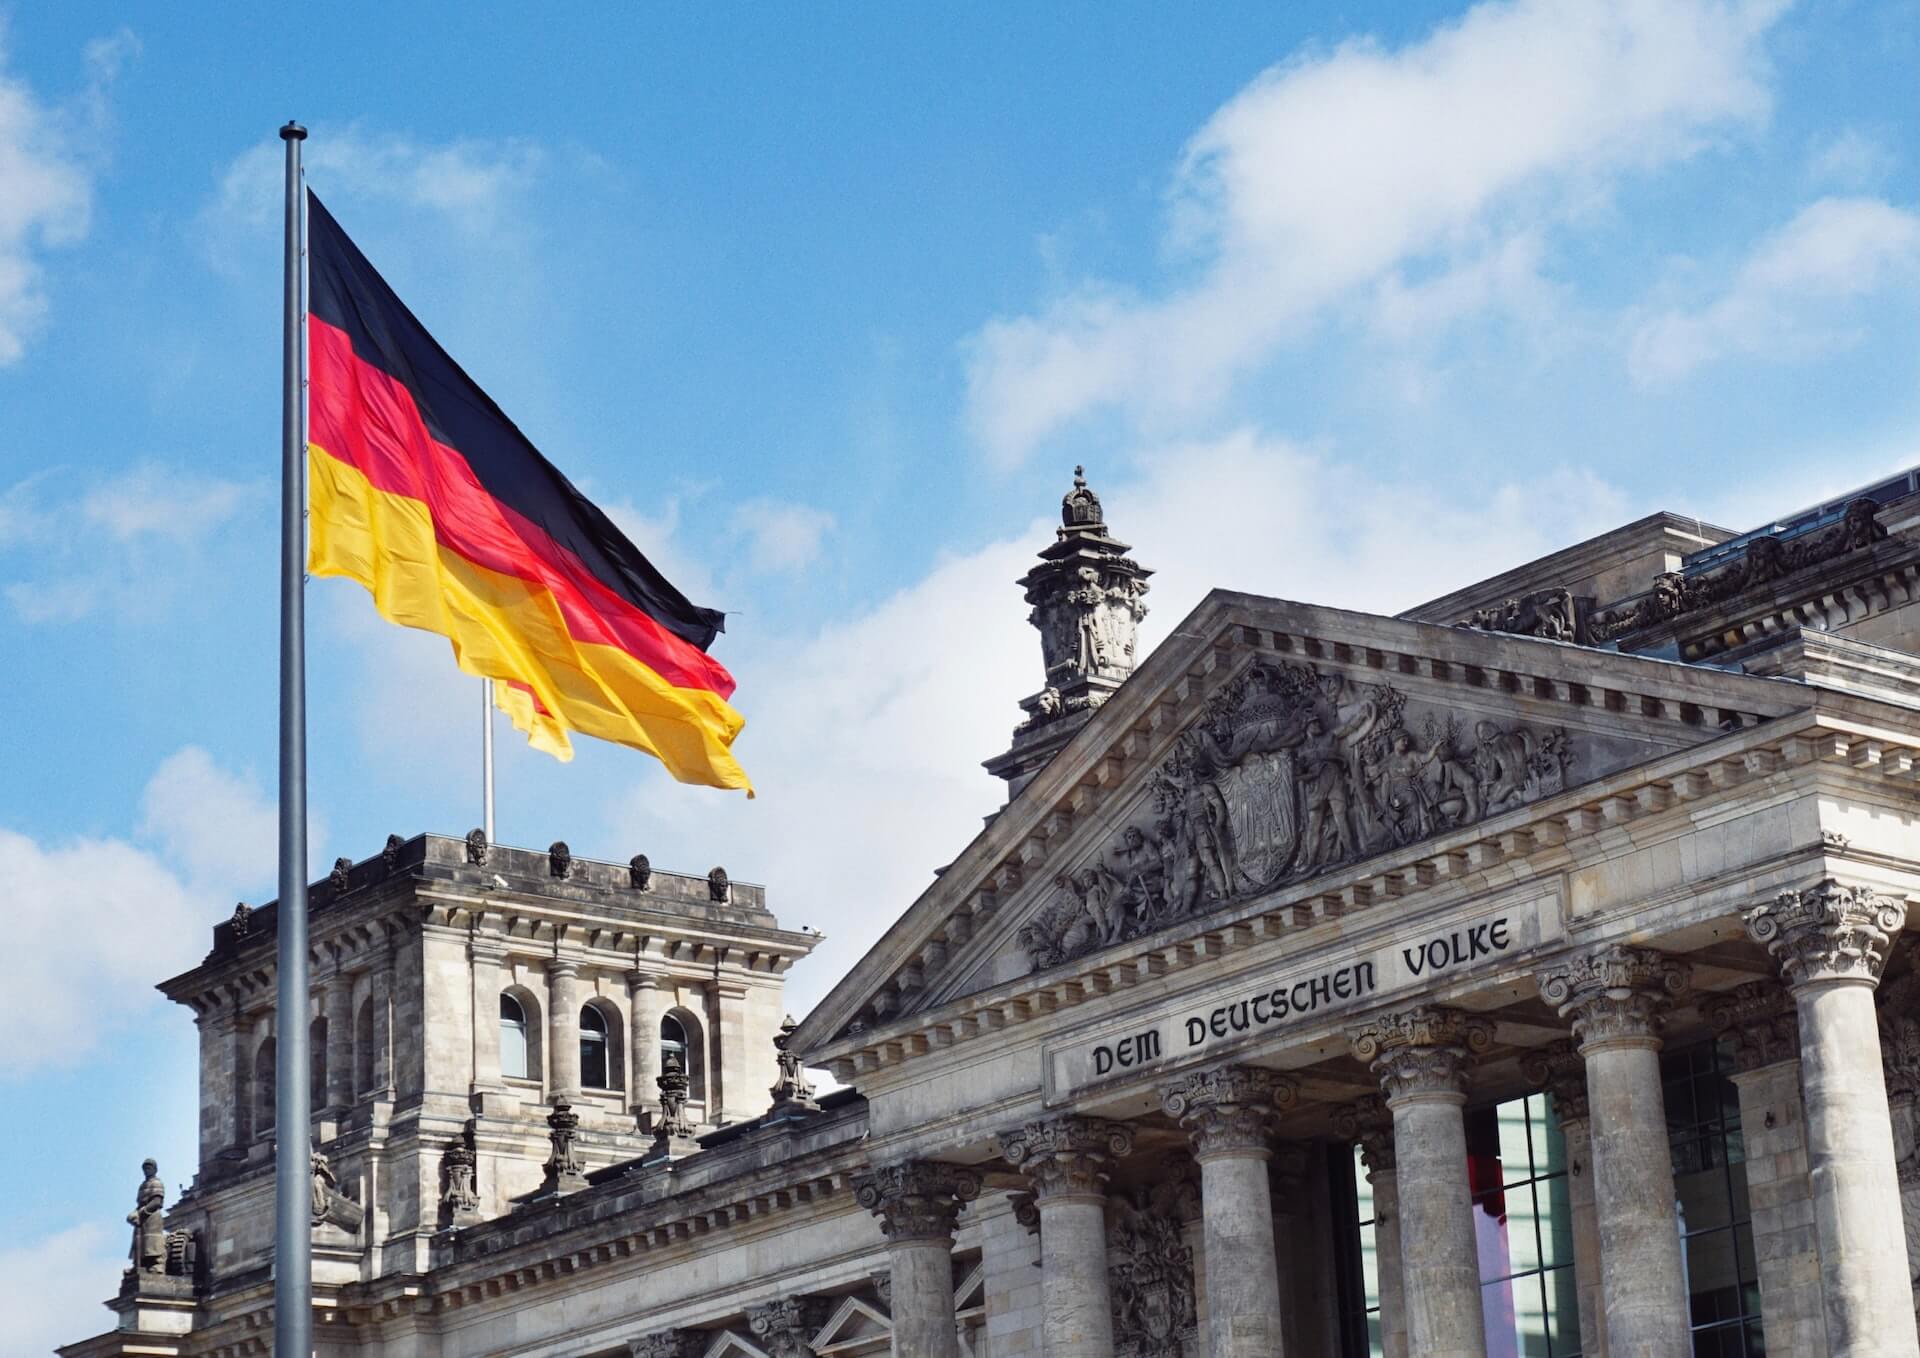 Flag of Germany infront of an old building